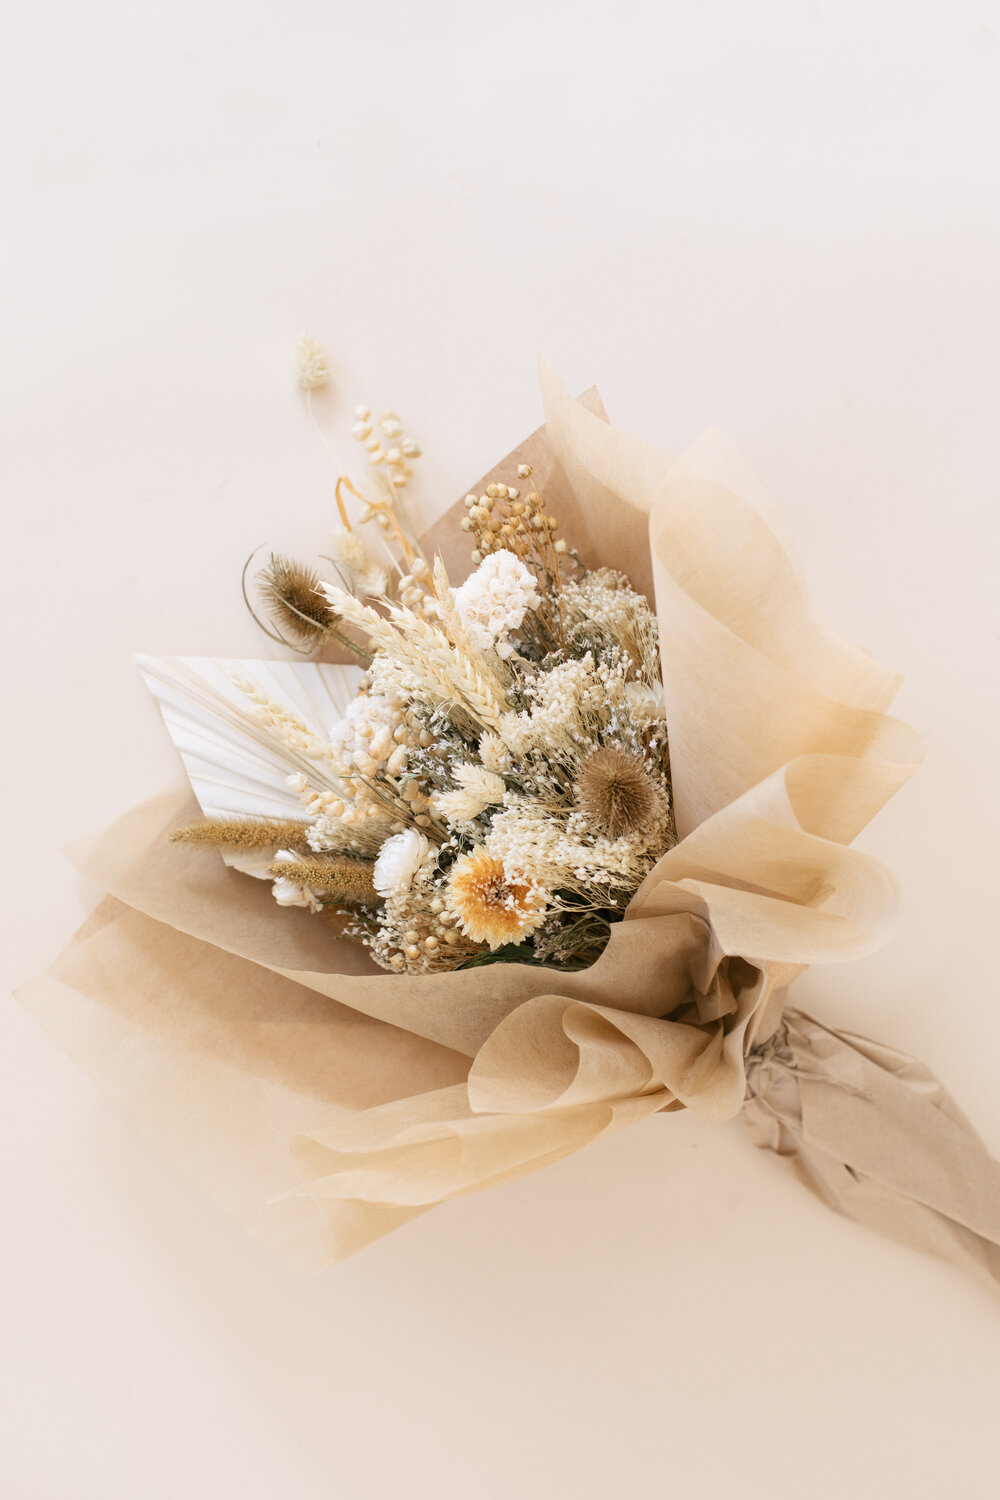 925 Fragrant Petals And Buds: Choose From 9 Unique Dried Flowers From  Gfdr5207, $28.08